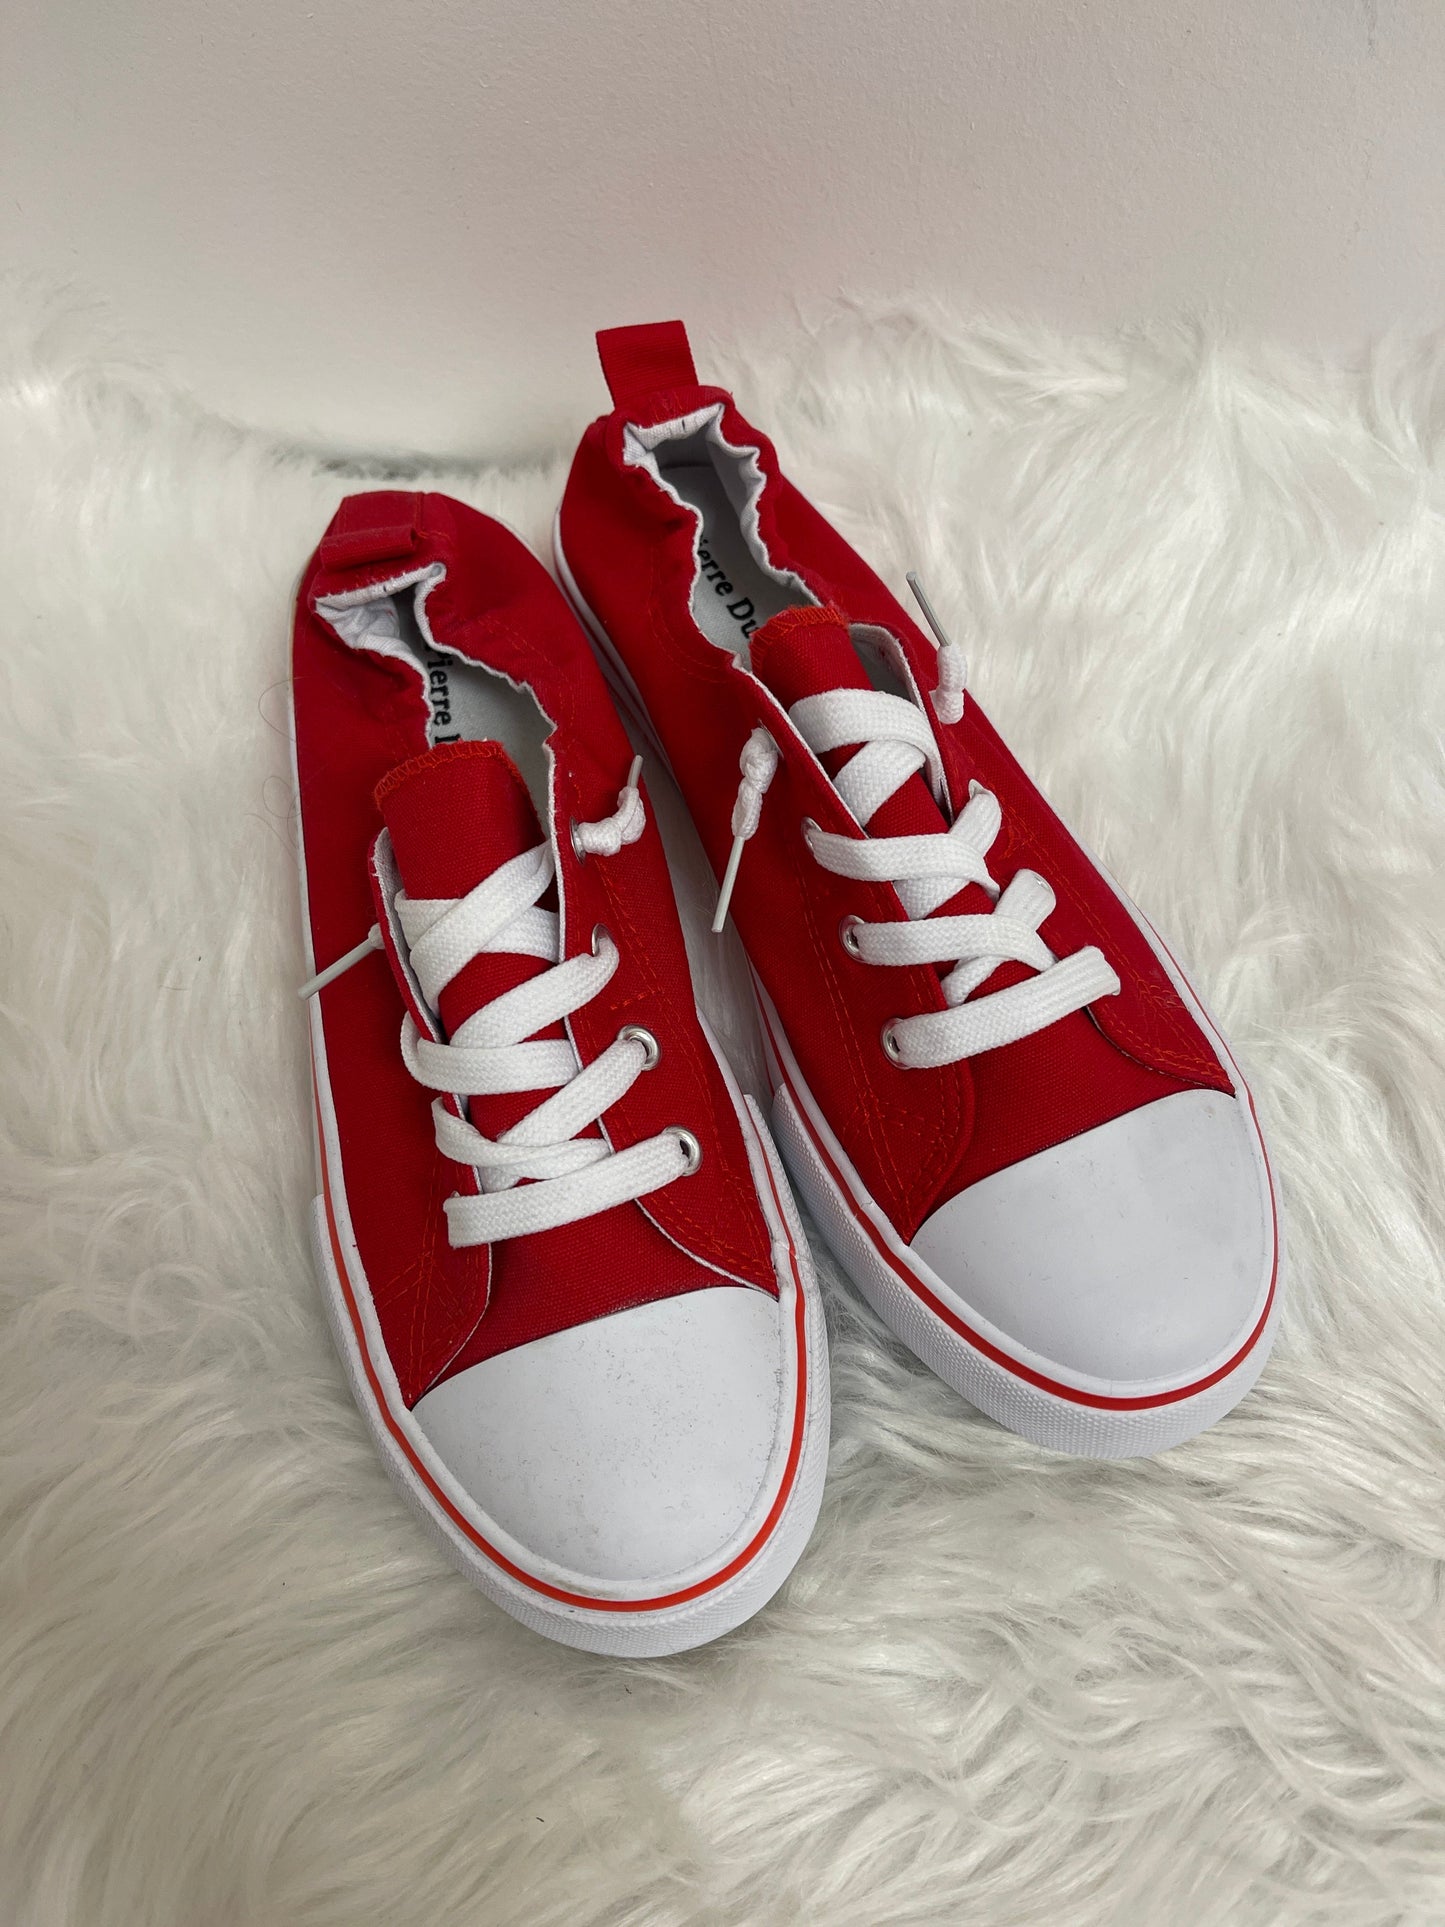 Red Shoes Sneakers Pierre Dumas, Size 8